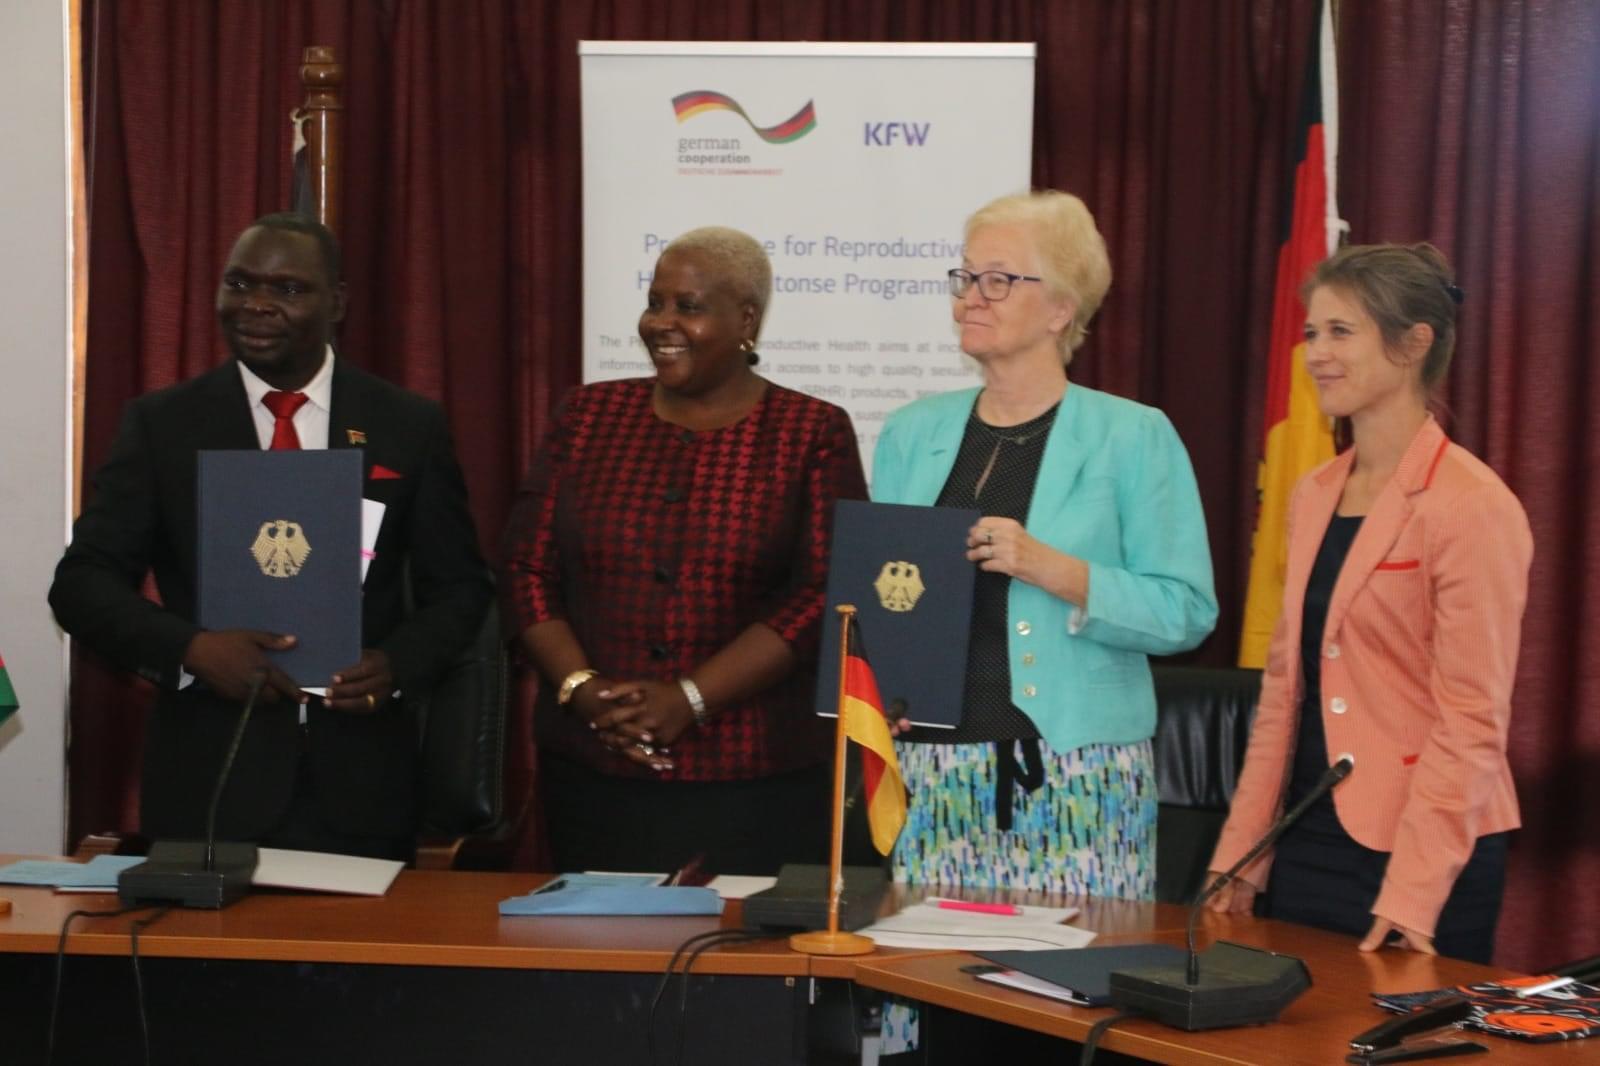 Germany provides €16m for 3rd phase of Reproductive Health Pogramme in Malawi